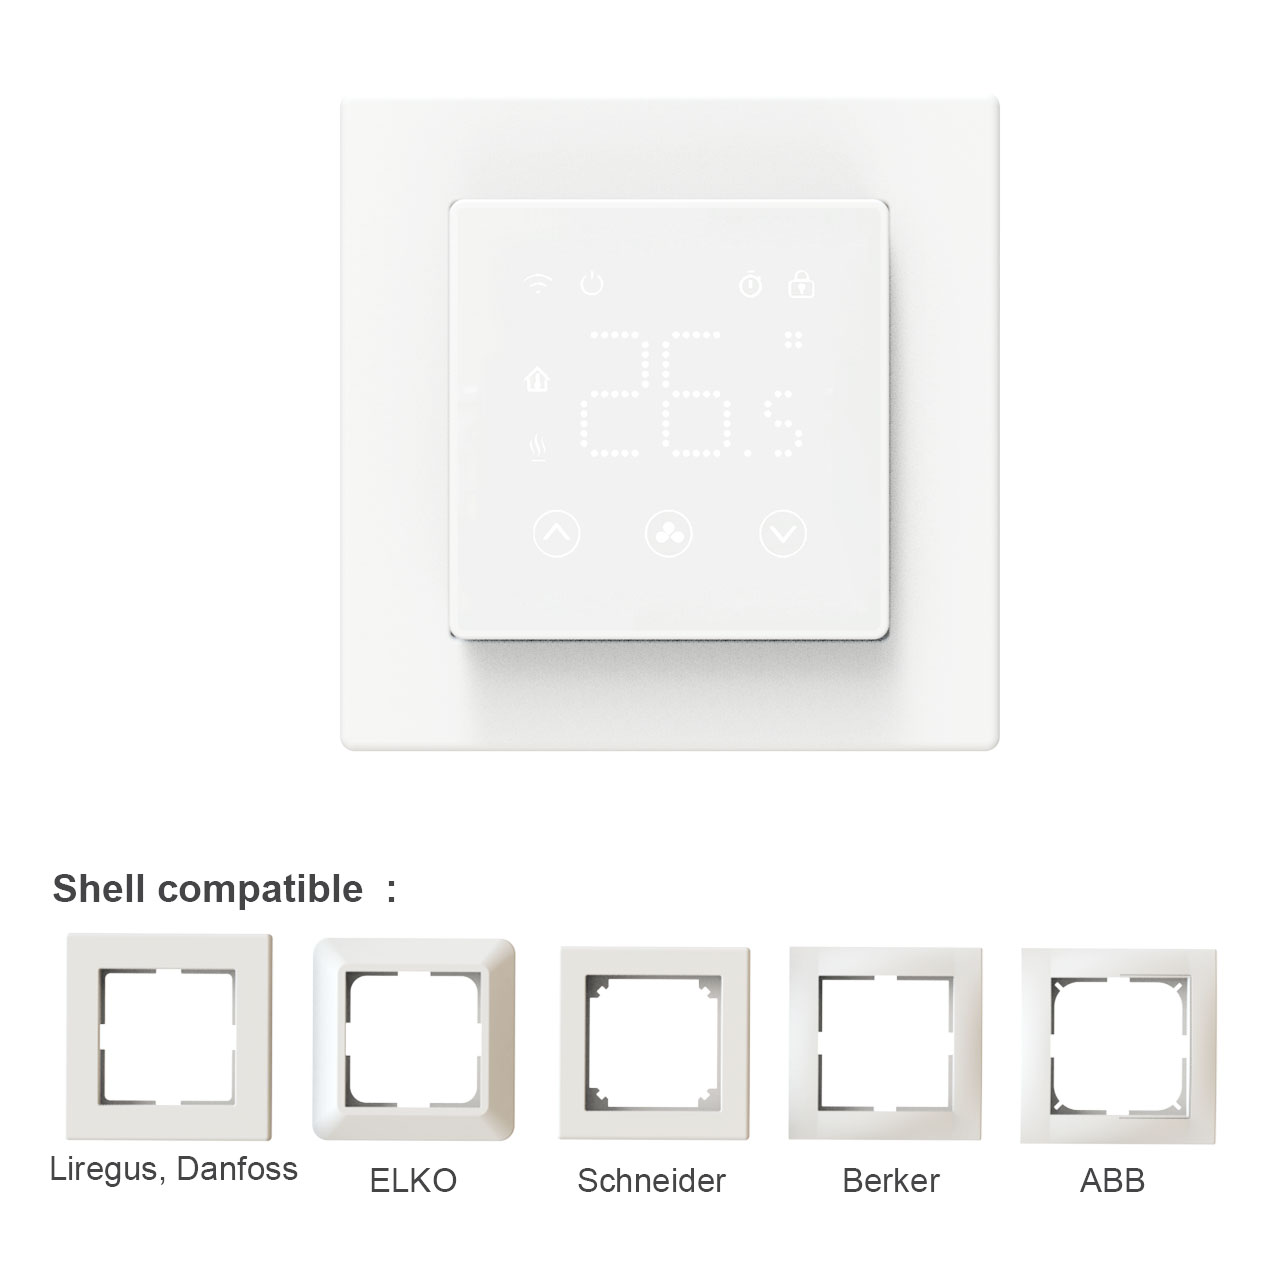 55*55mm Replaceable Frames Programmable Thermostat Tuya WiFi Control